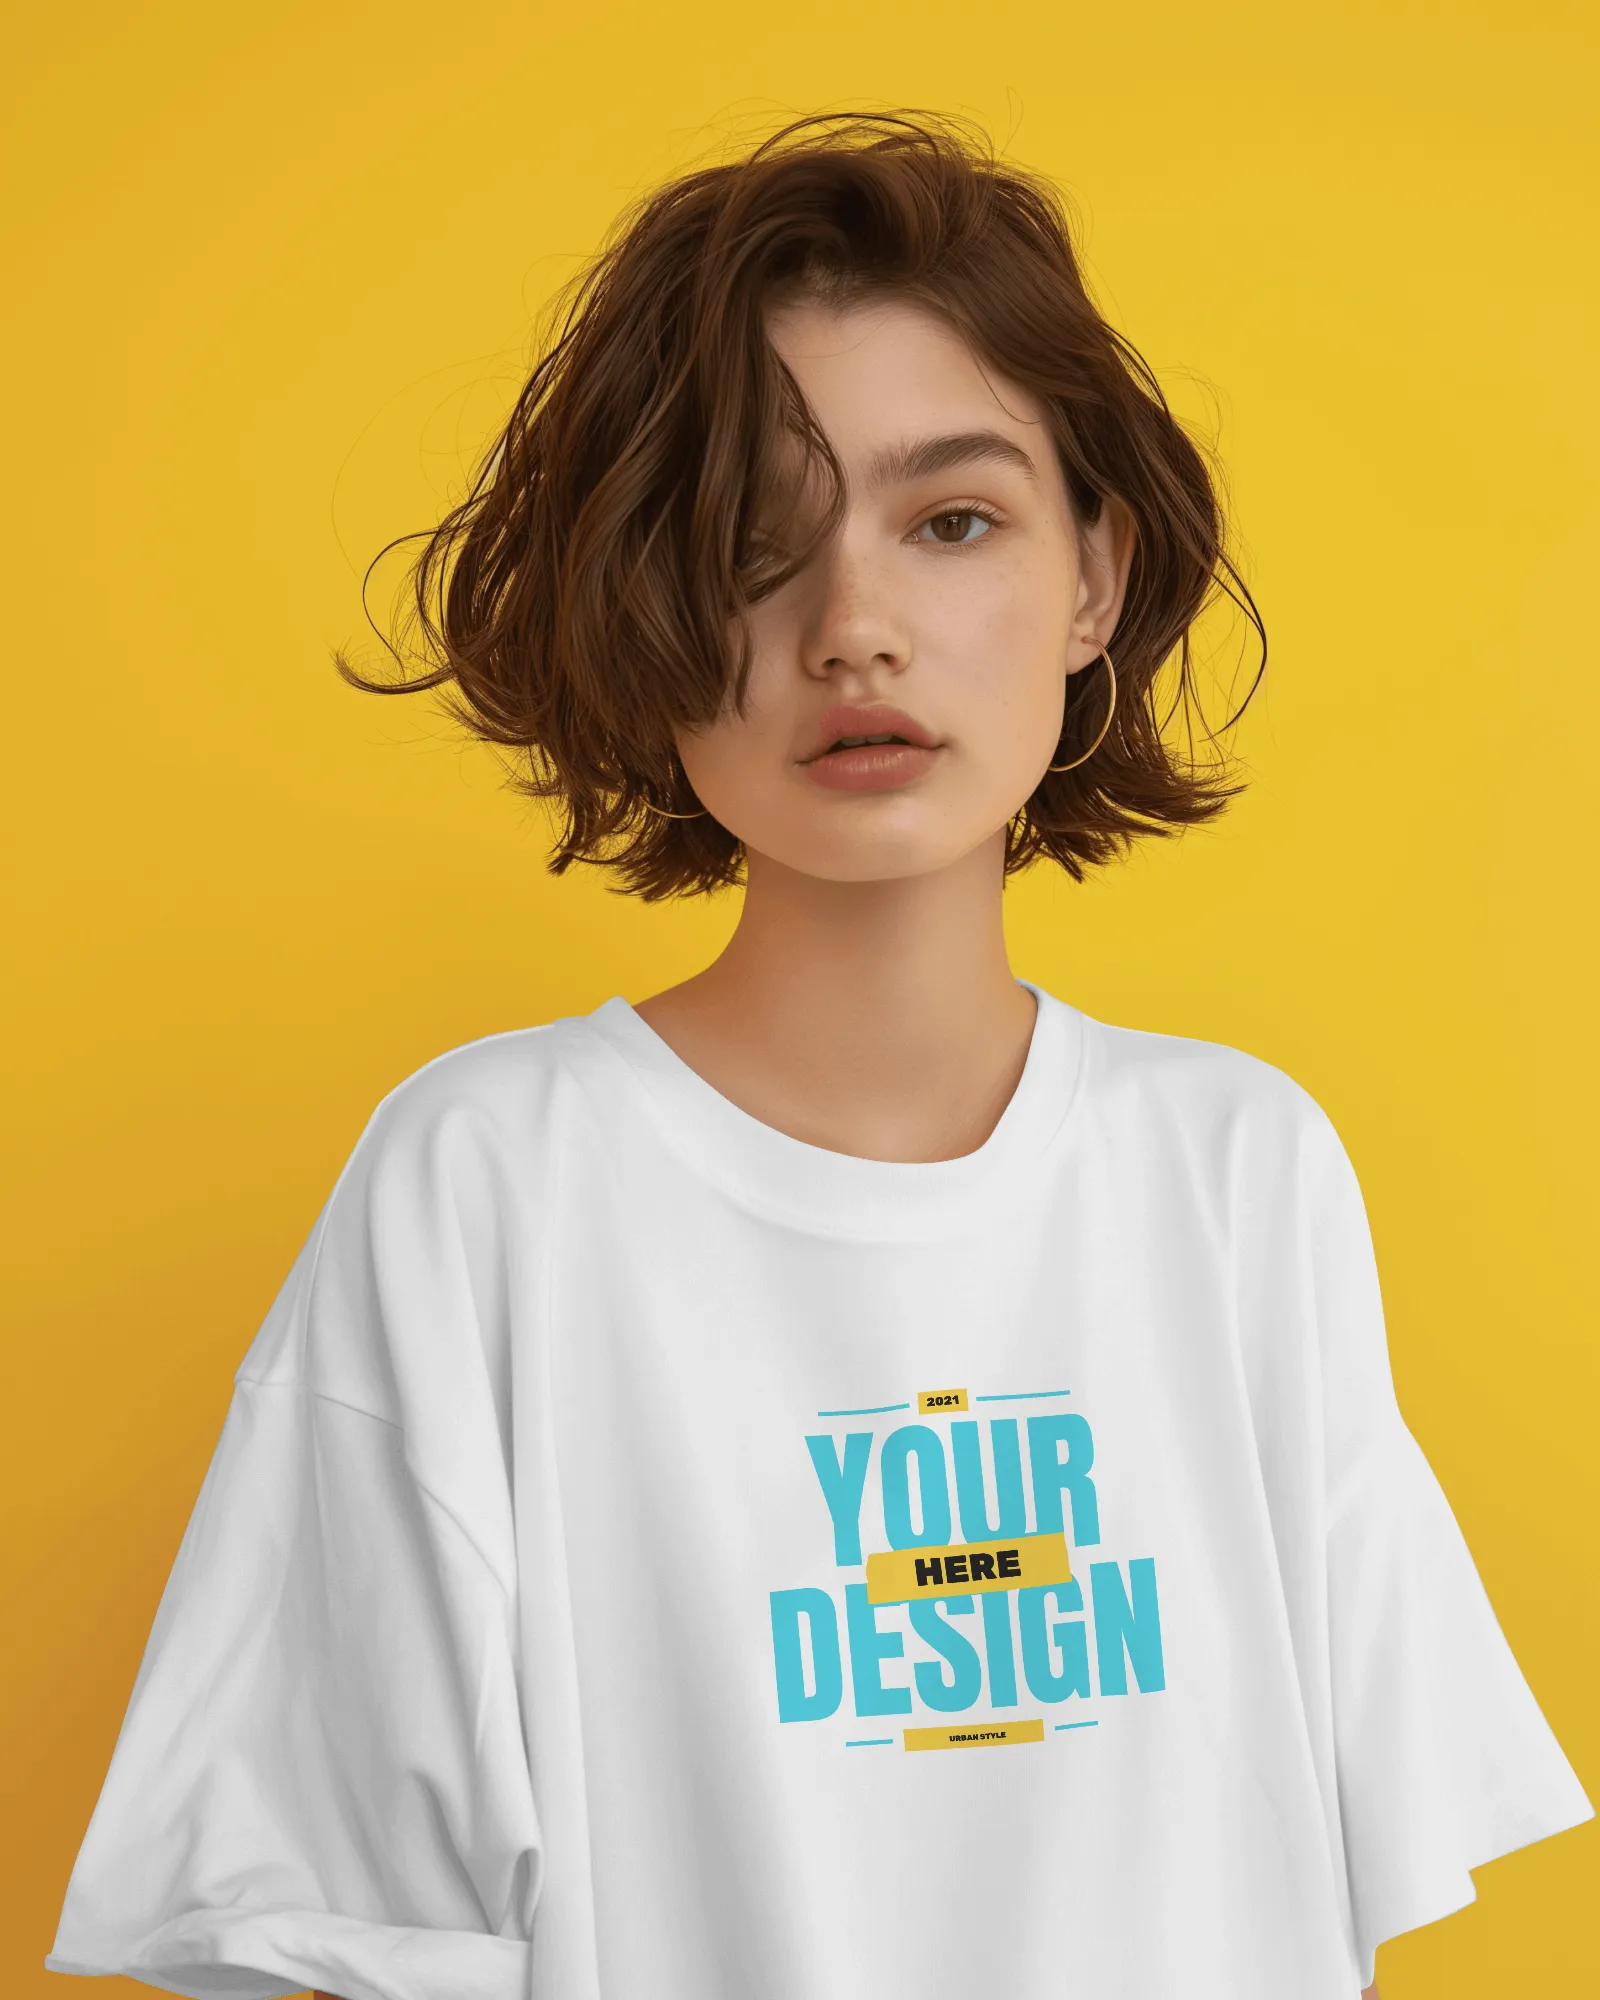 young female model with frizzy hair wearing a white tshirt mockup